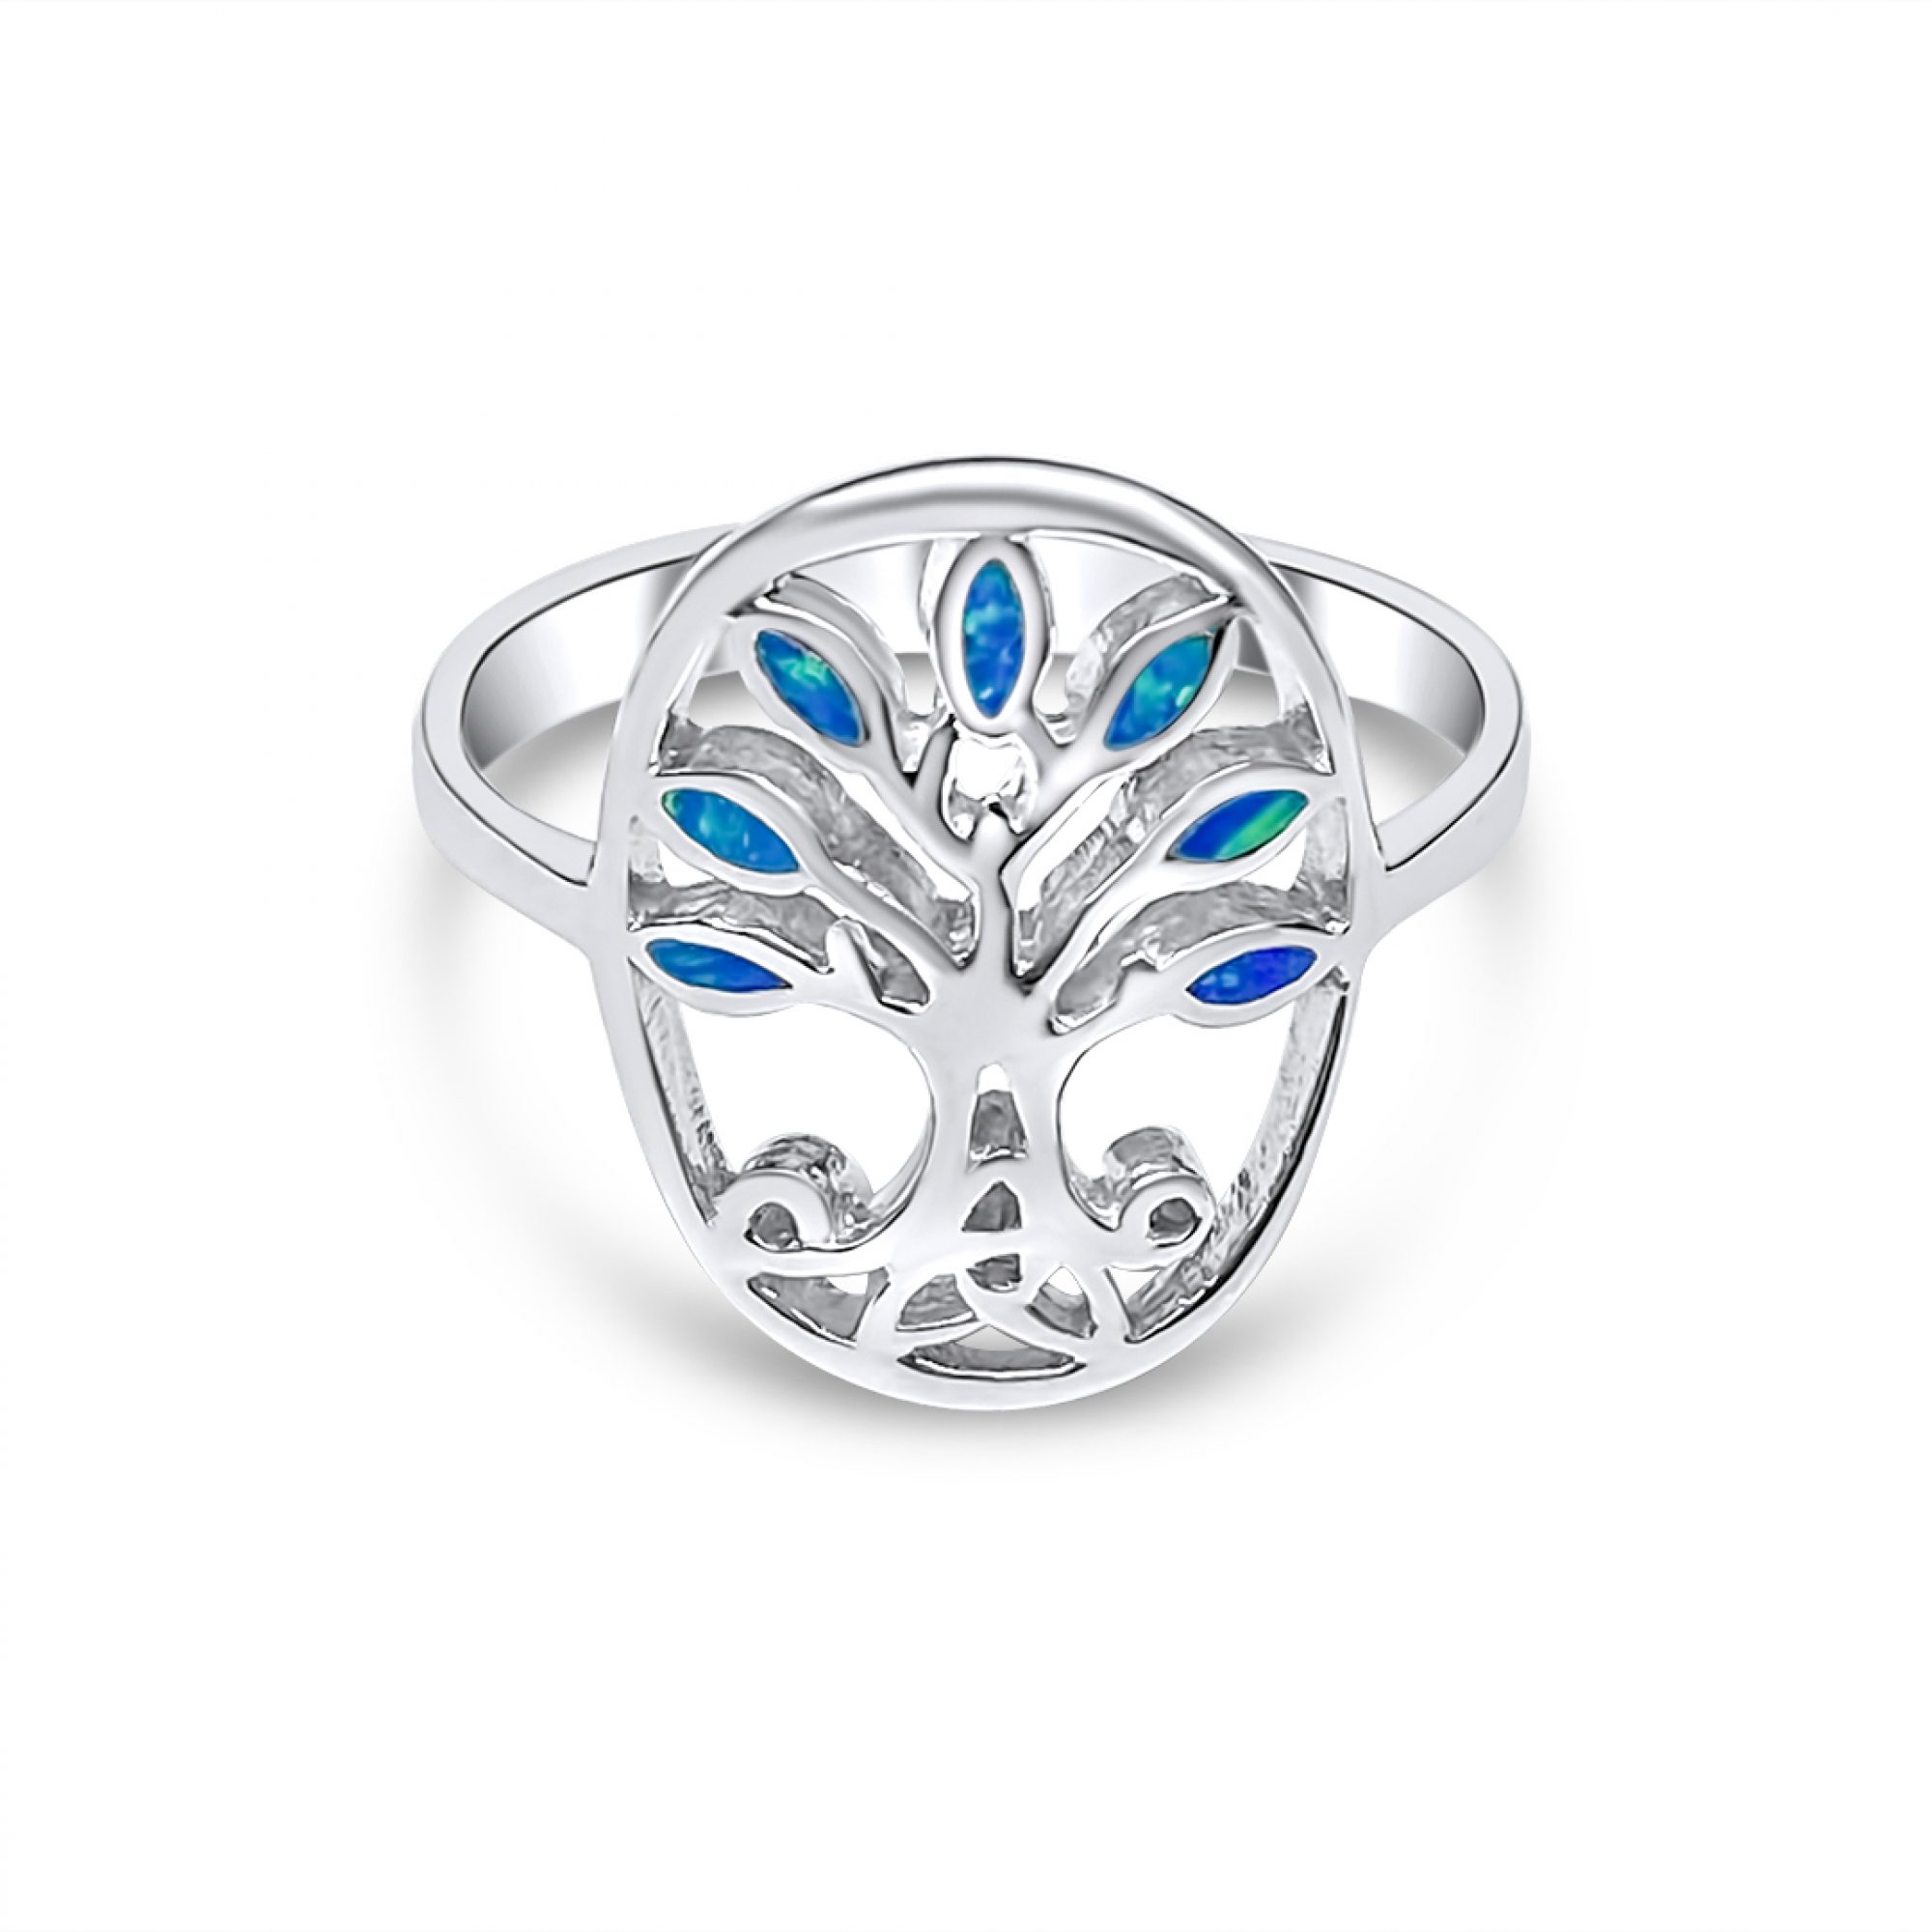 Silver tree of life ring with opal stones 